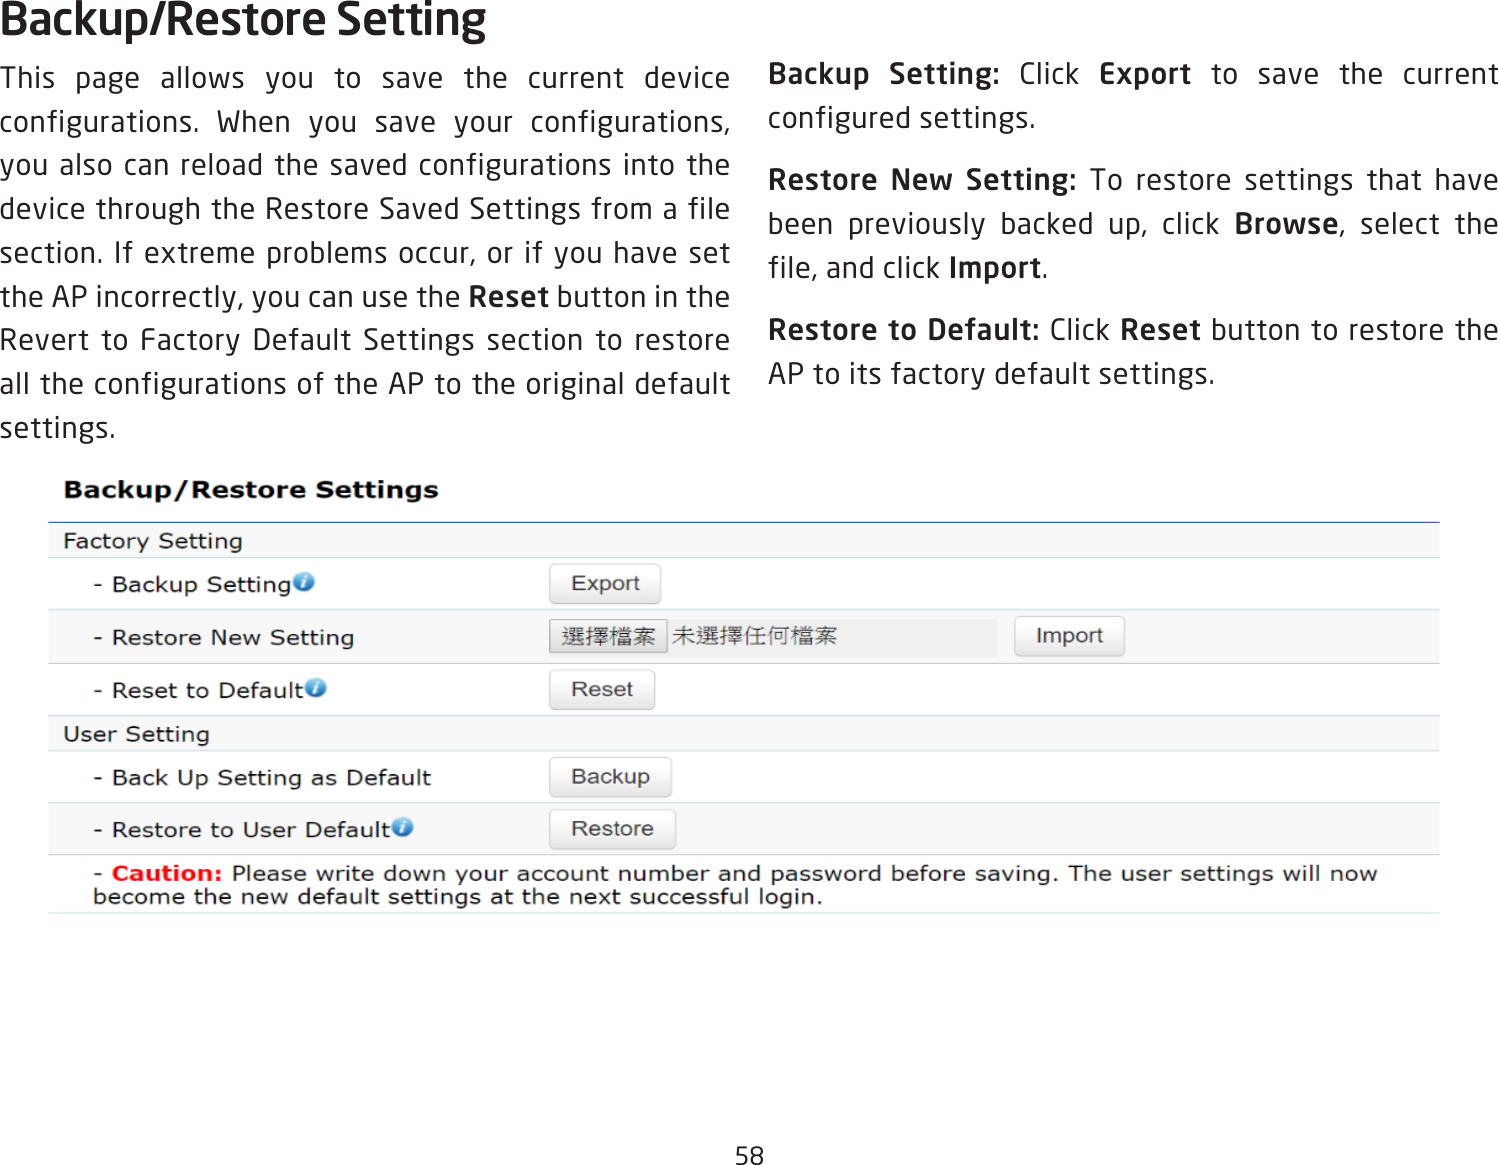 58Backup/Restore SettingThis page allows you to save the current device configurations. When you save your configurations, you also can reload the saved configurations into the device through the Restore Saved Settings from a file section. If extreme problems occur, or if you have set the AP incorrectly, you can use the Reset button in the Revert to Factory Default Settings section to restore all the configurations of the AP to the original default settings.Backup Setting: Click Export to save the current configured settings.Restore New Setting: To restore settings that have been previously backed up, click Browse, select the file, and click Import.Restore to Default: Click Reset button to restore the AP to its factory default settings.